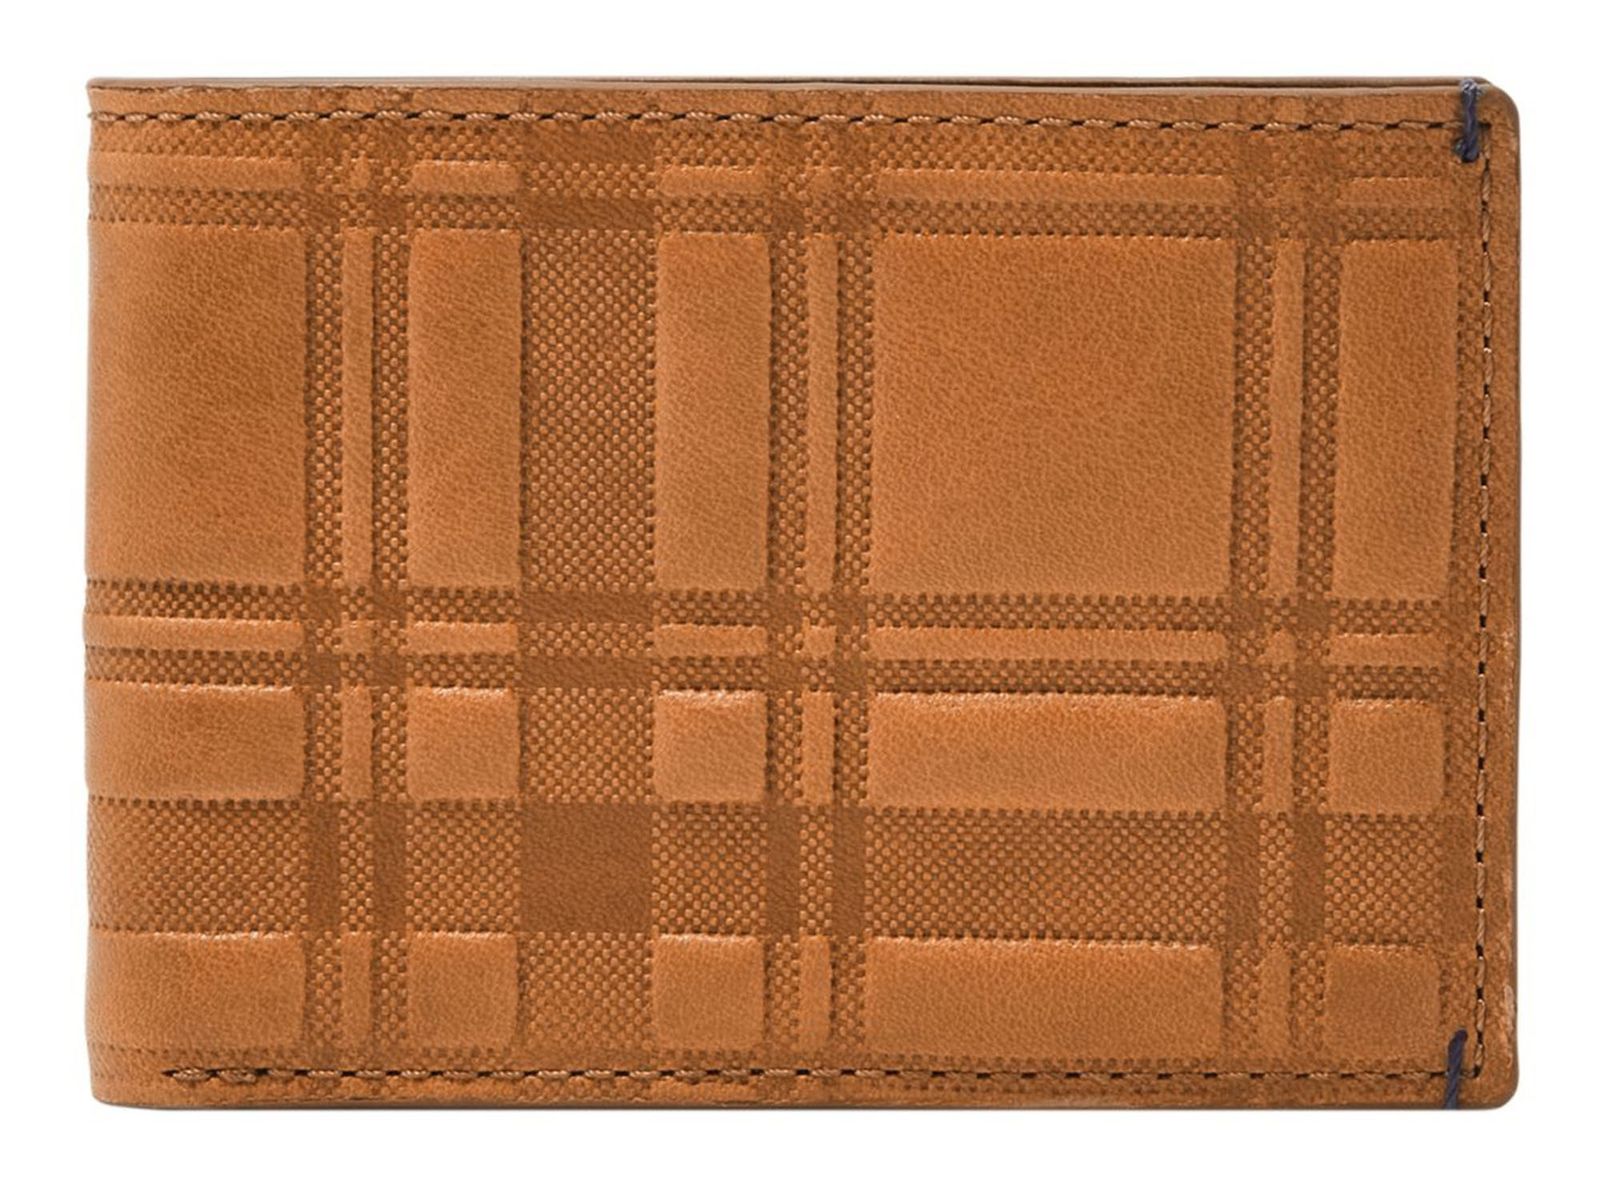 FOSSIL Front Pocket Wallet Bifold Camel | Buy bags, purses & accessories  online | modeherz